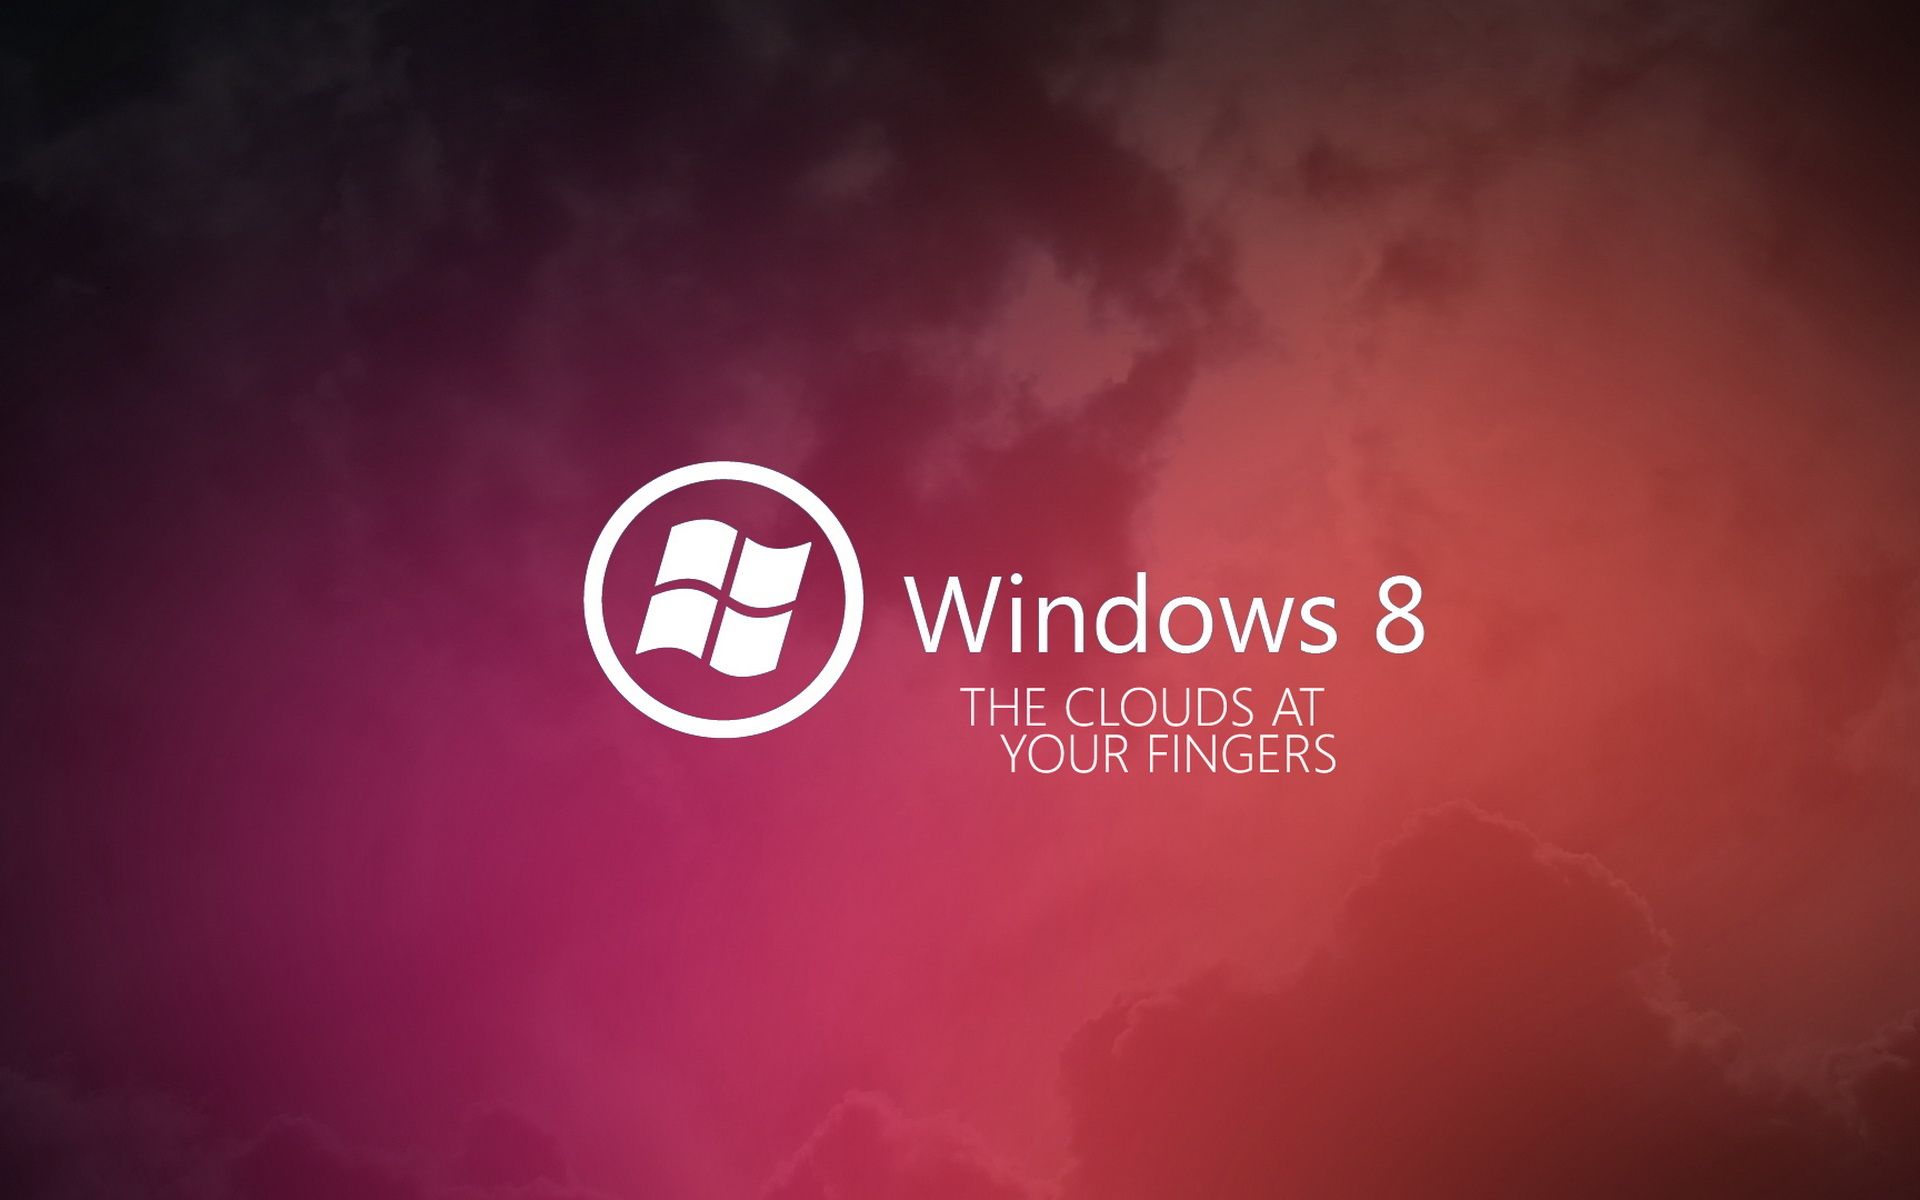 Windows 8 wallpapers and images - wallpapers, pictures, photos